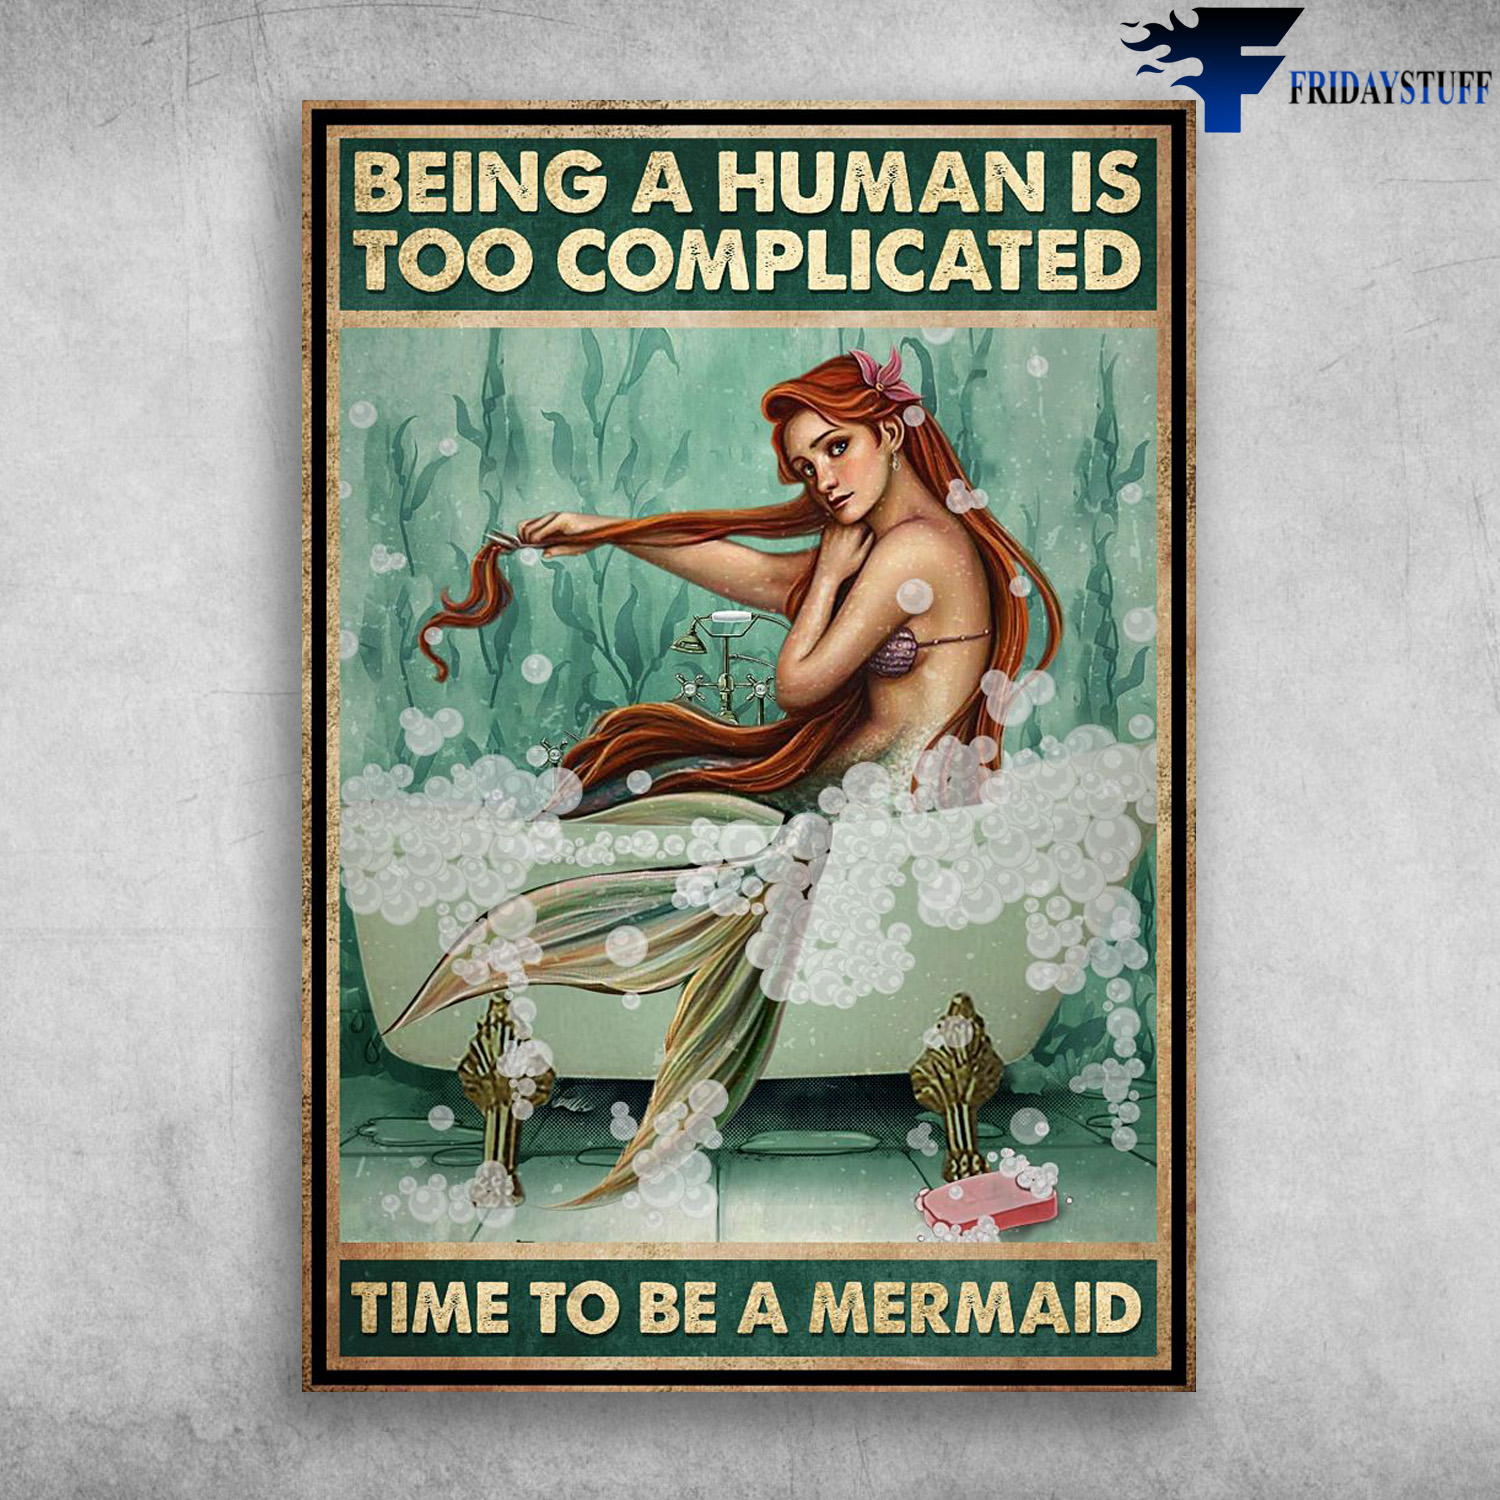 Mermaid In Bath - Being A Human Is Too Complicated, Time To Be A Mermaid